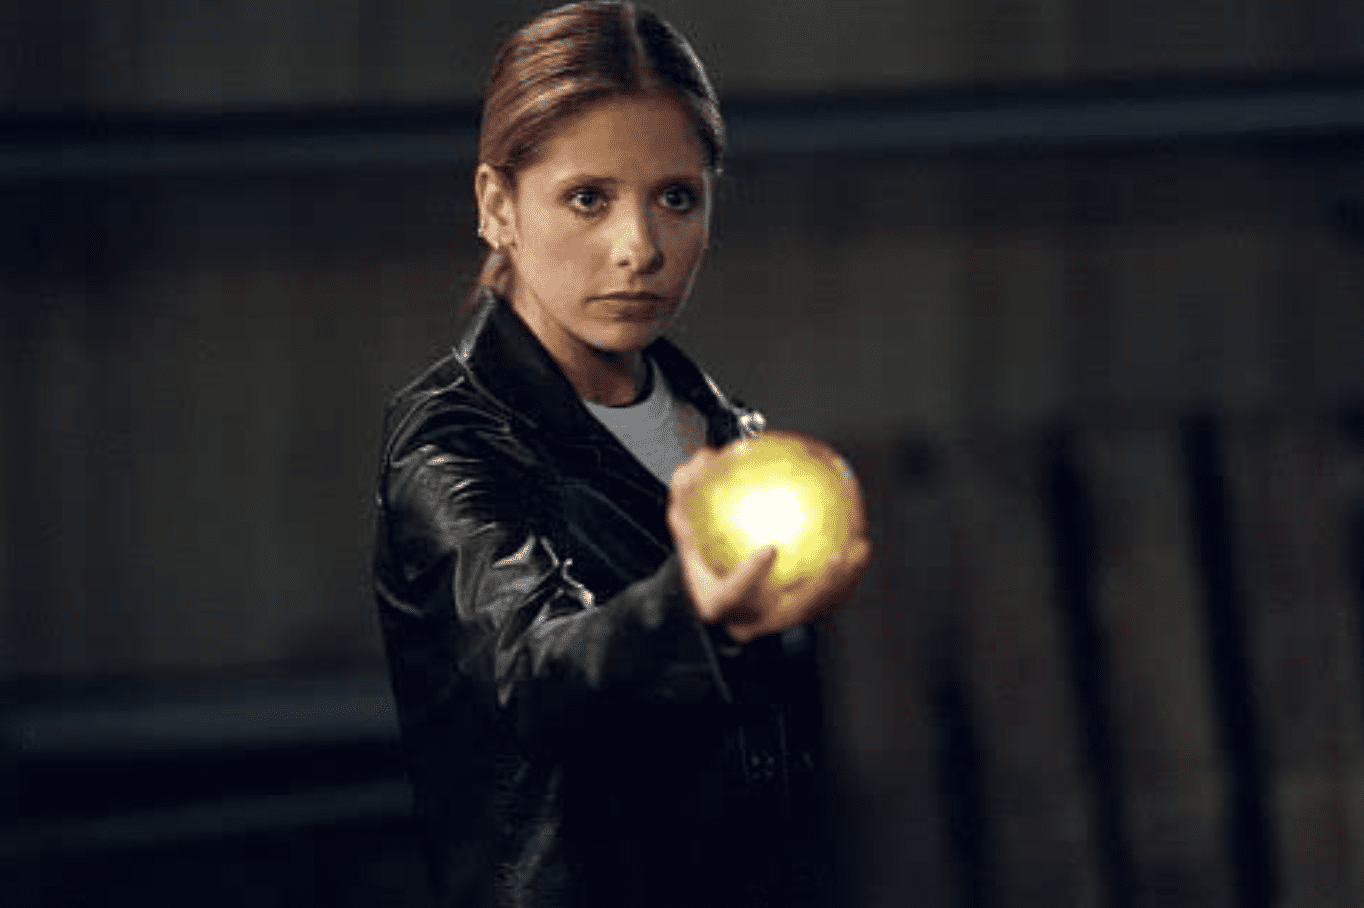 Buffy, wearing a black leather jacket, holds out a glowing, yellow orb